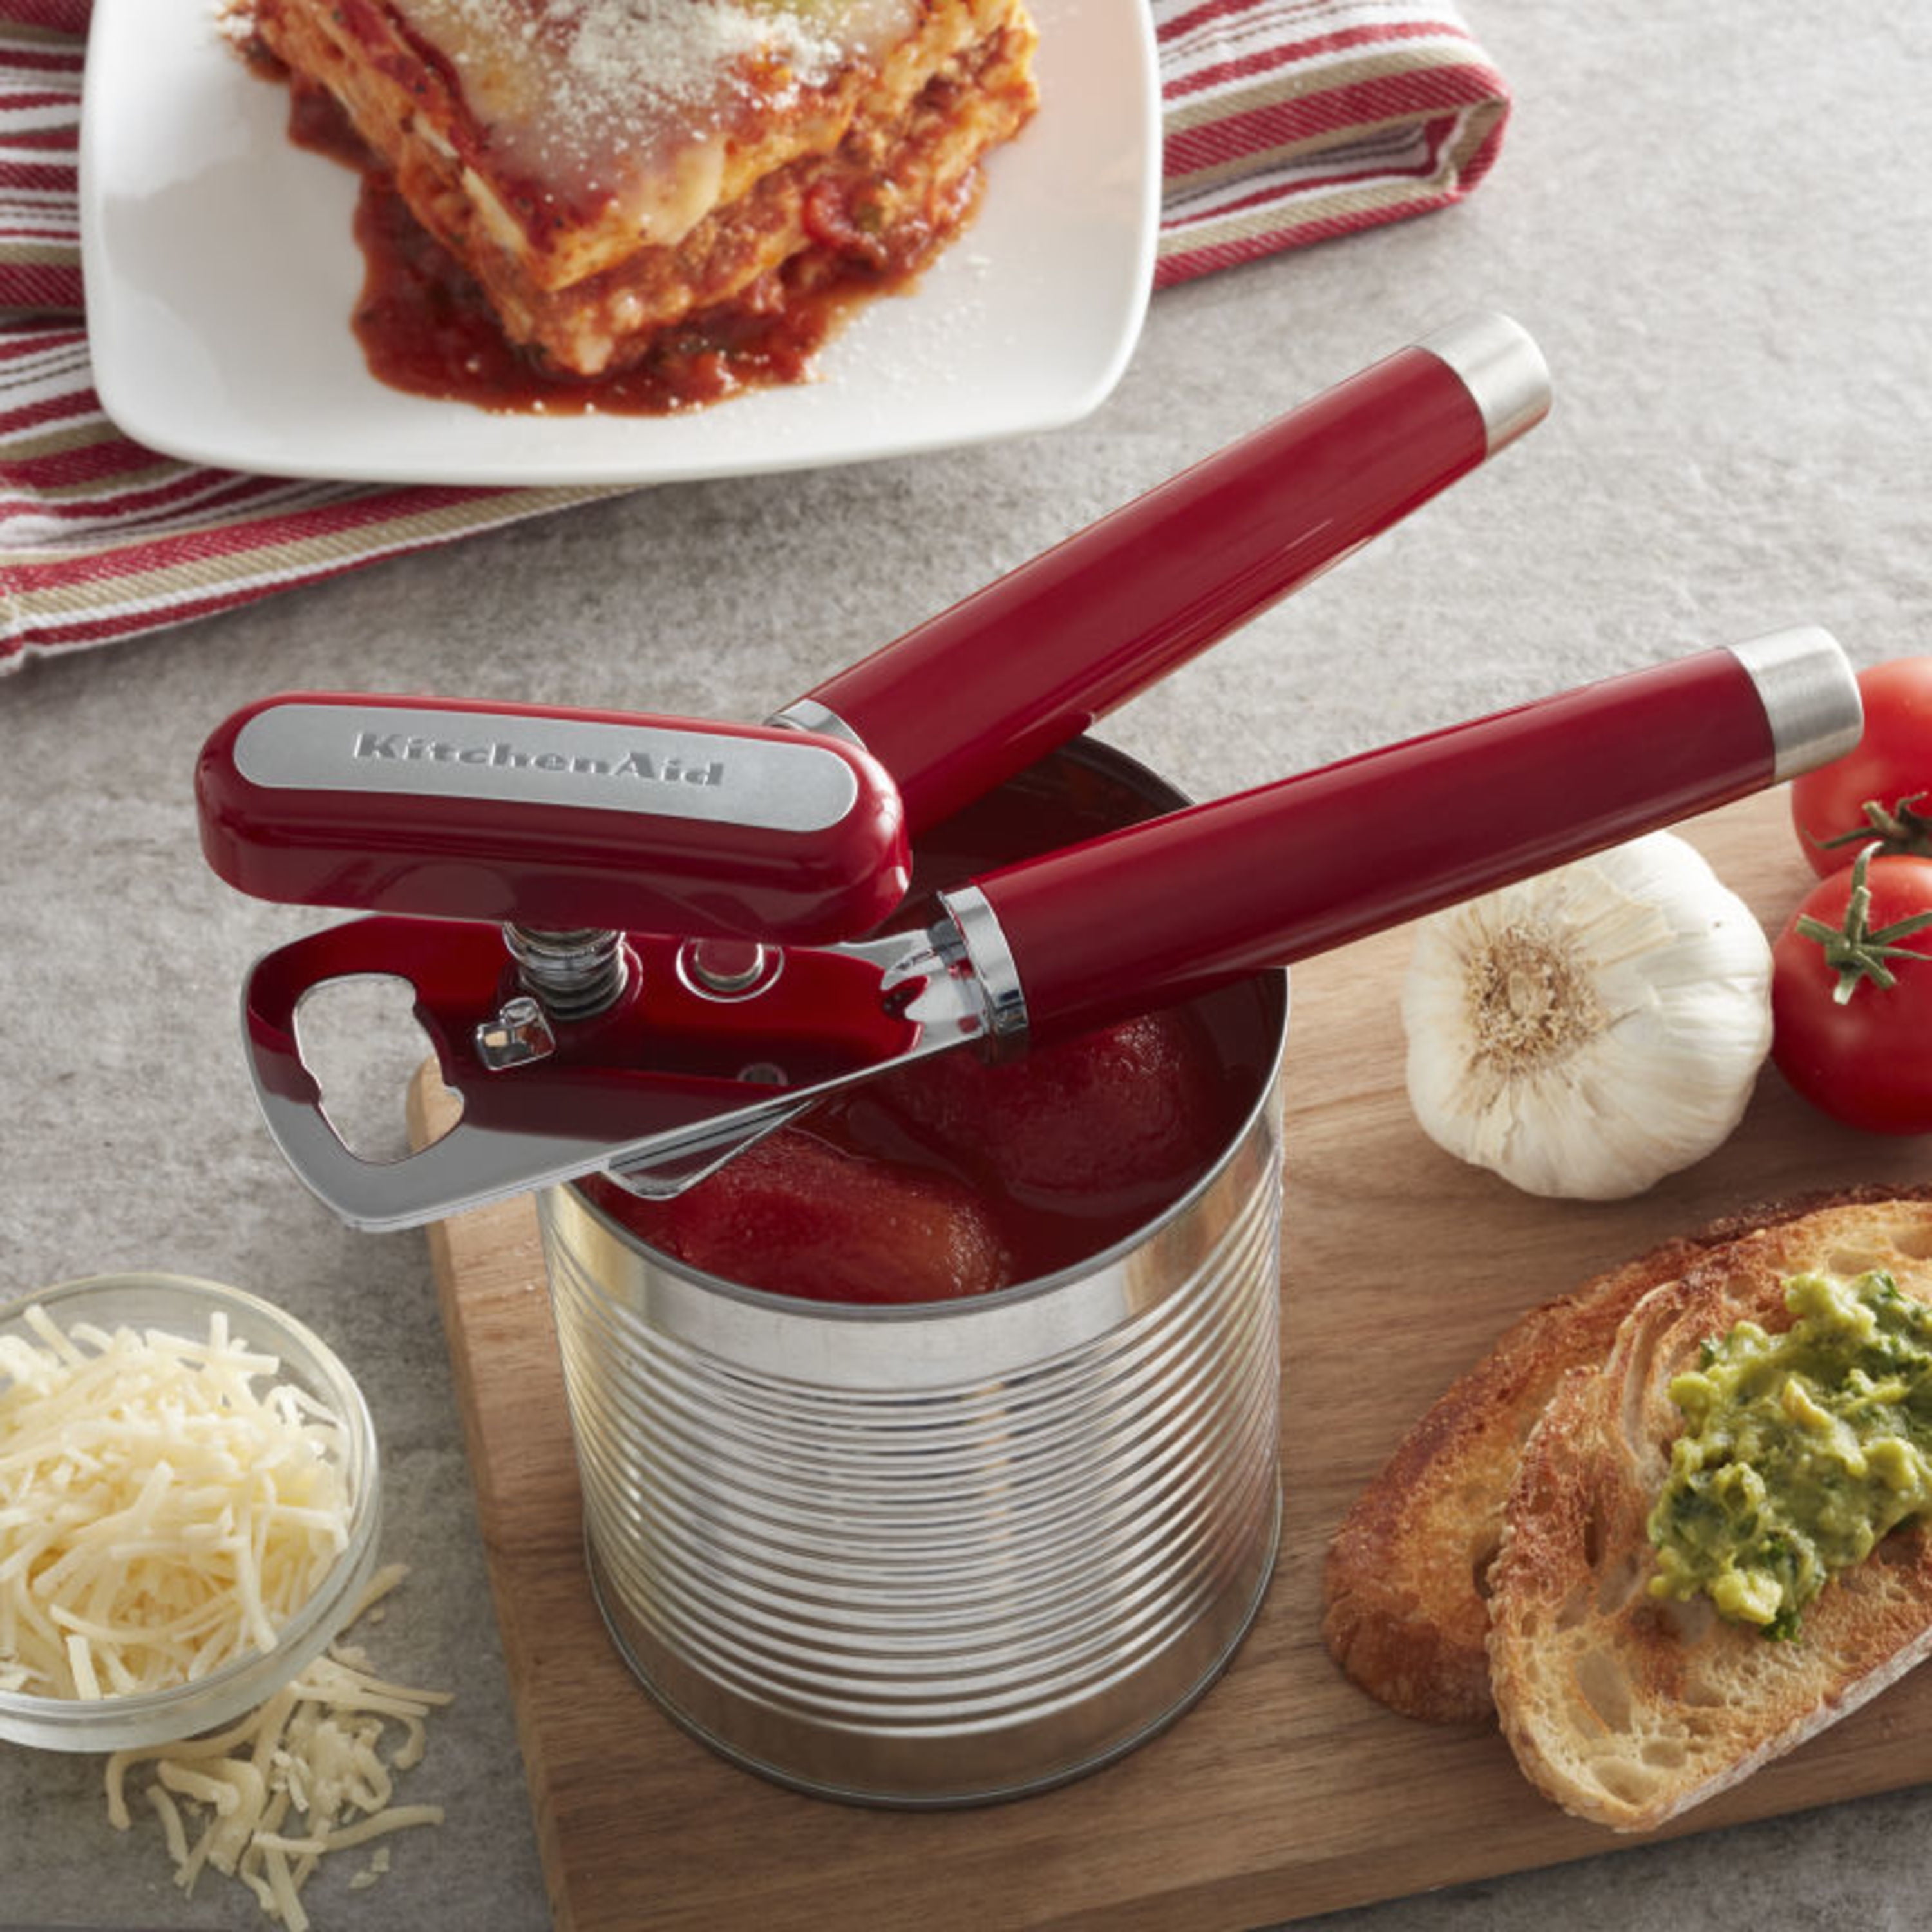 KitchenAid Can Opener Kitchen Manual Turn Stainless Steel Blade - Empire Red